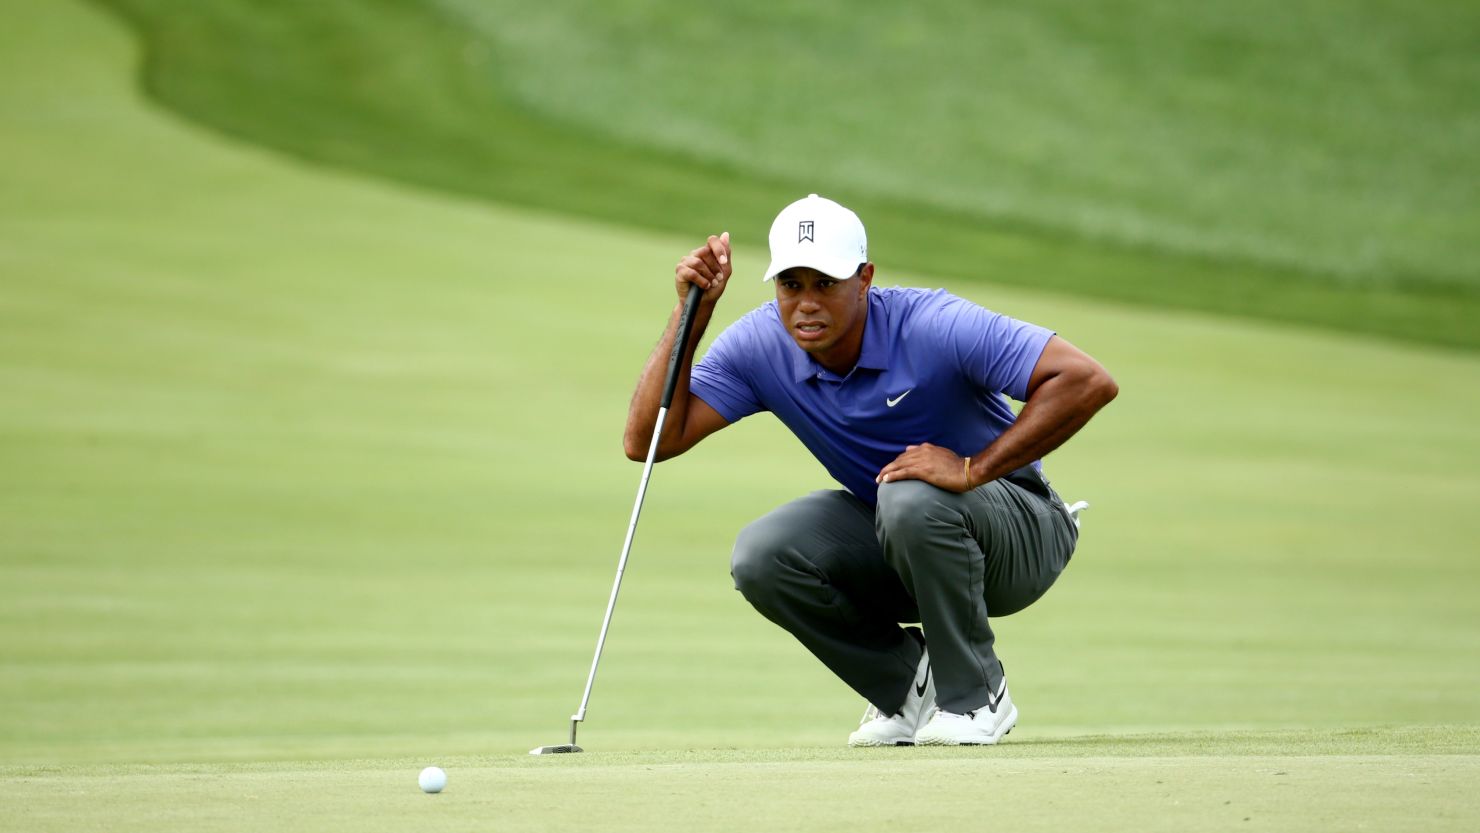 Tiger Wood's returned from injury, but didn't return to form after shooting 74.